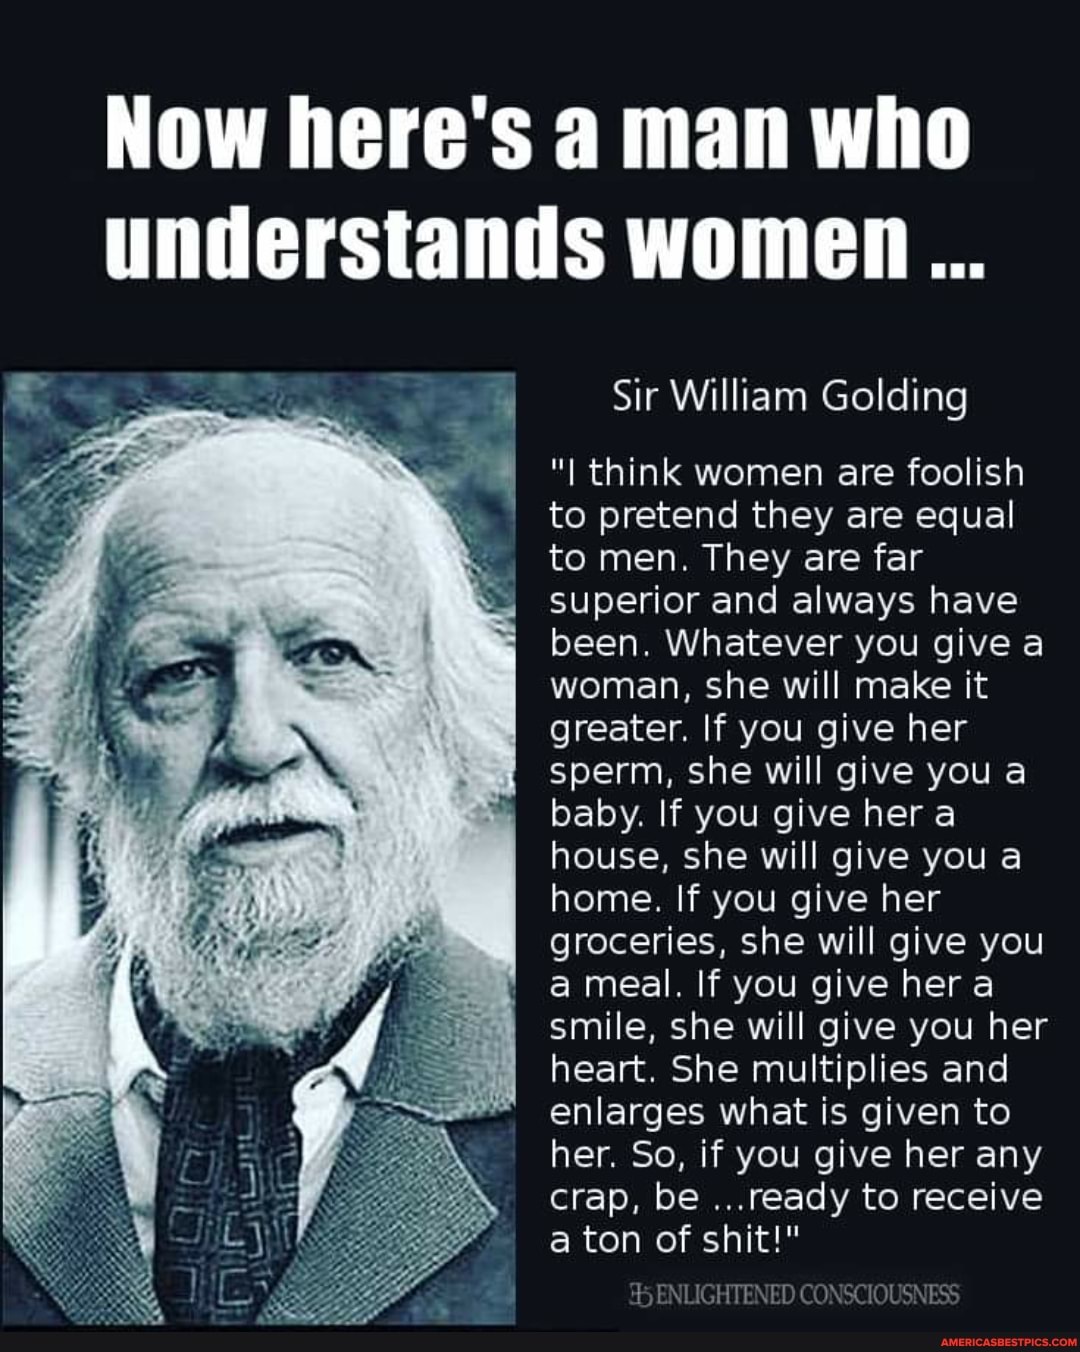 William golding whatever you give a woman